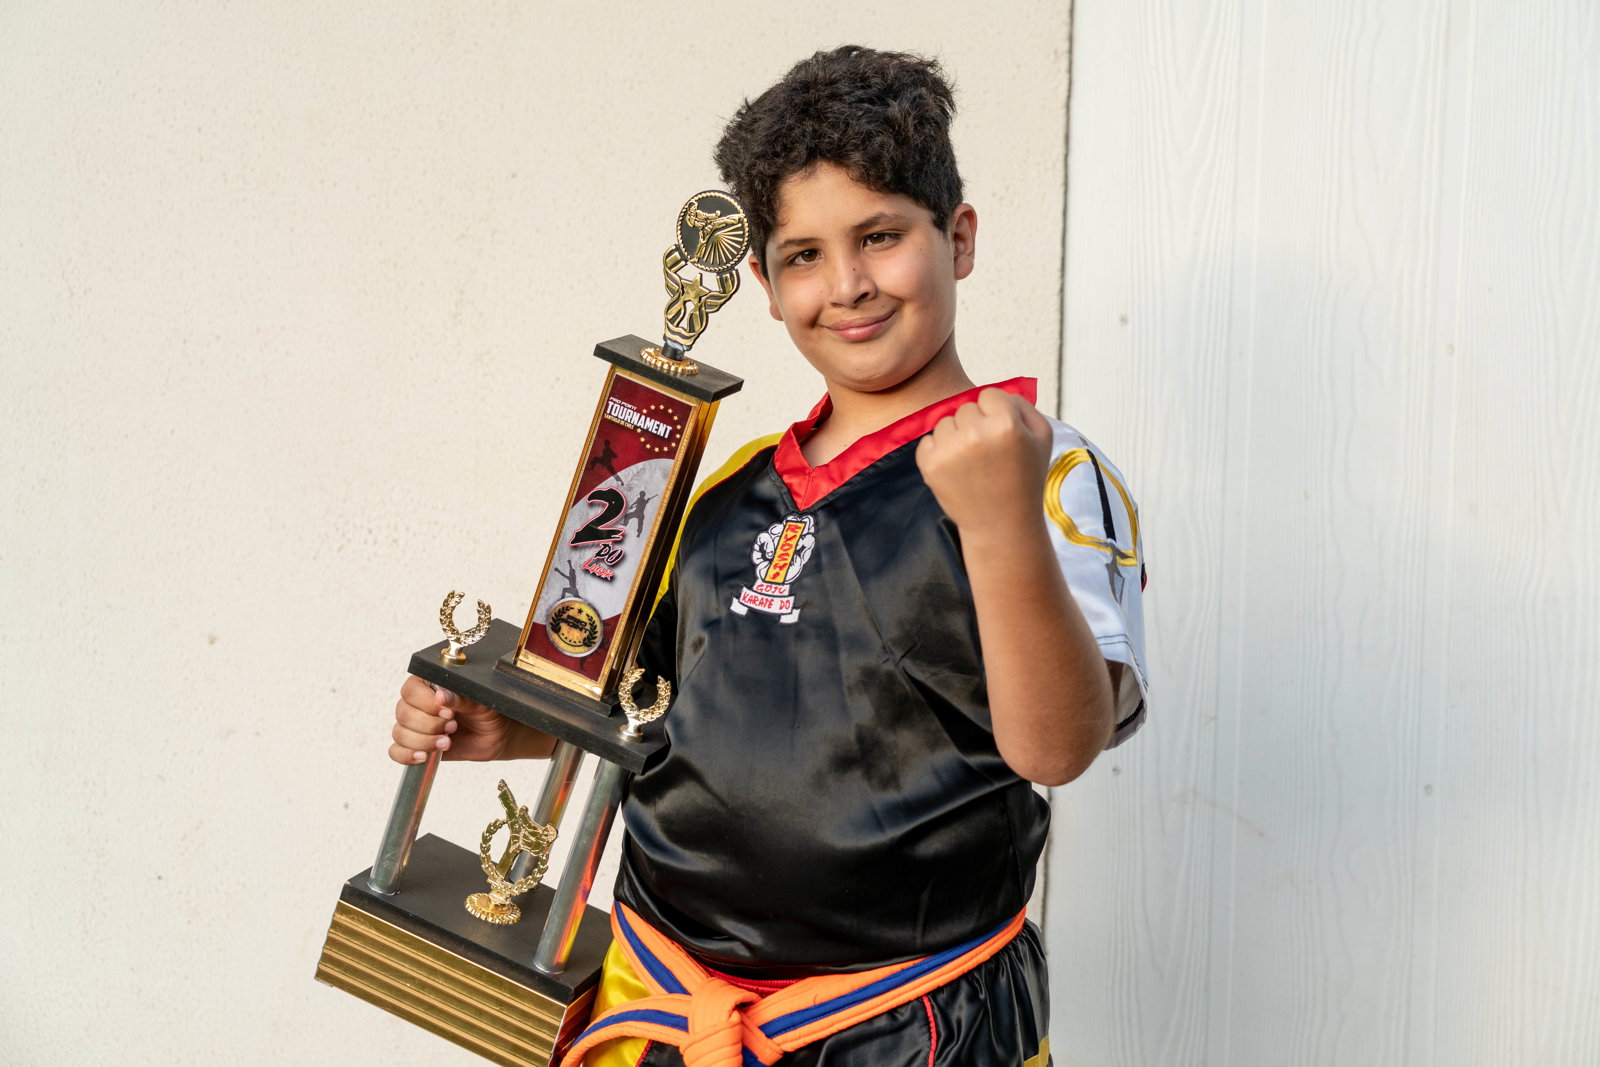 juan smiling. he's posing with his large taekwondo trophy in one hand while, with the other, he does a taekwondo pose. he's wearing his taekwondo uniform.